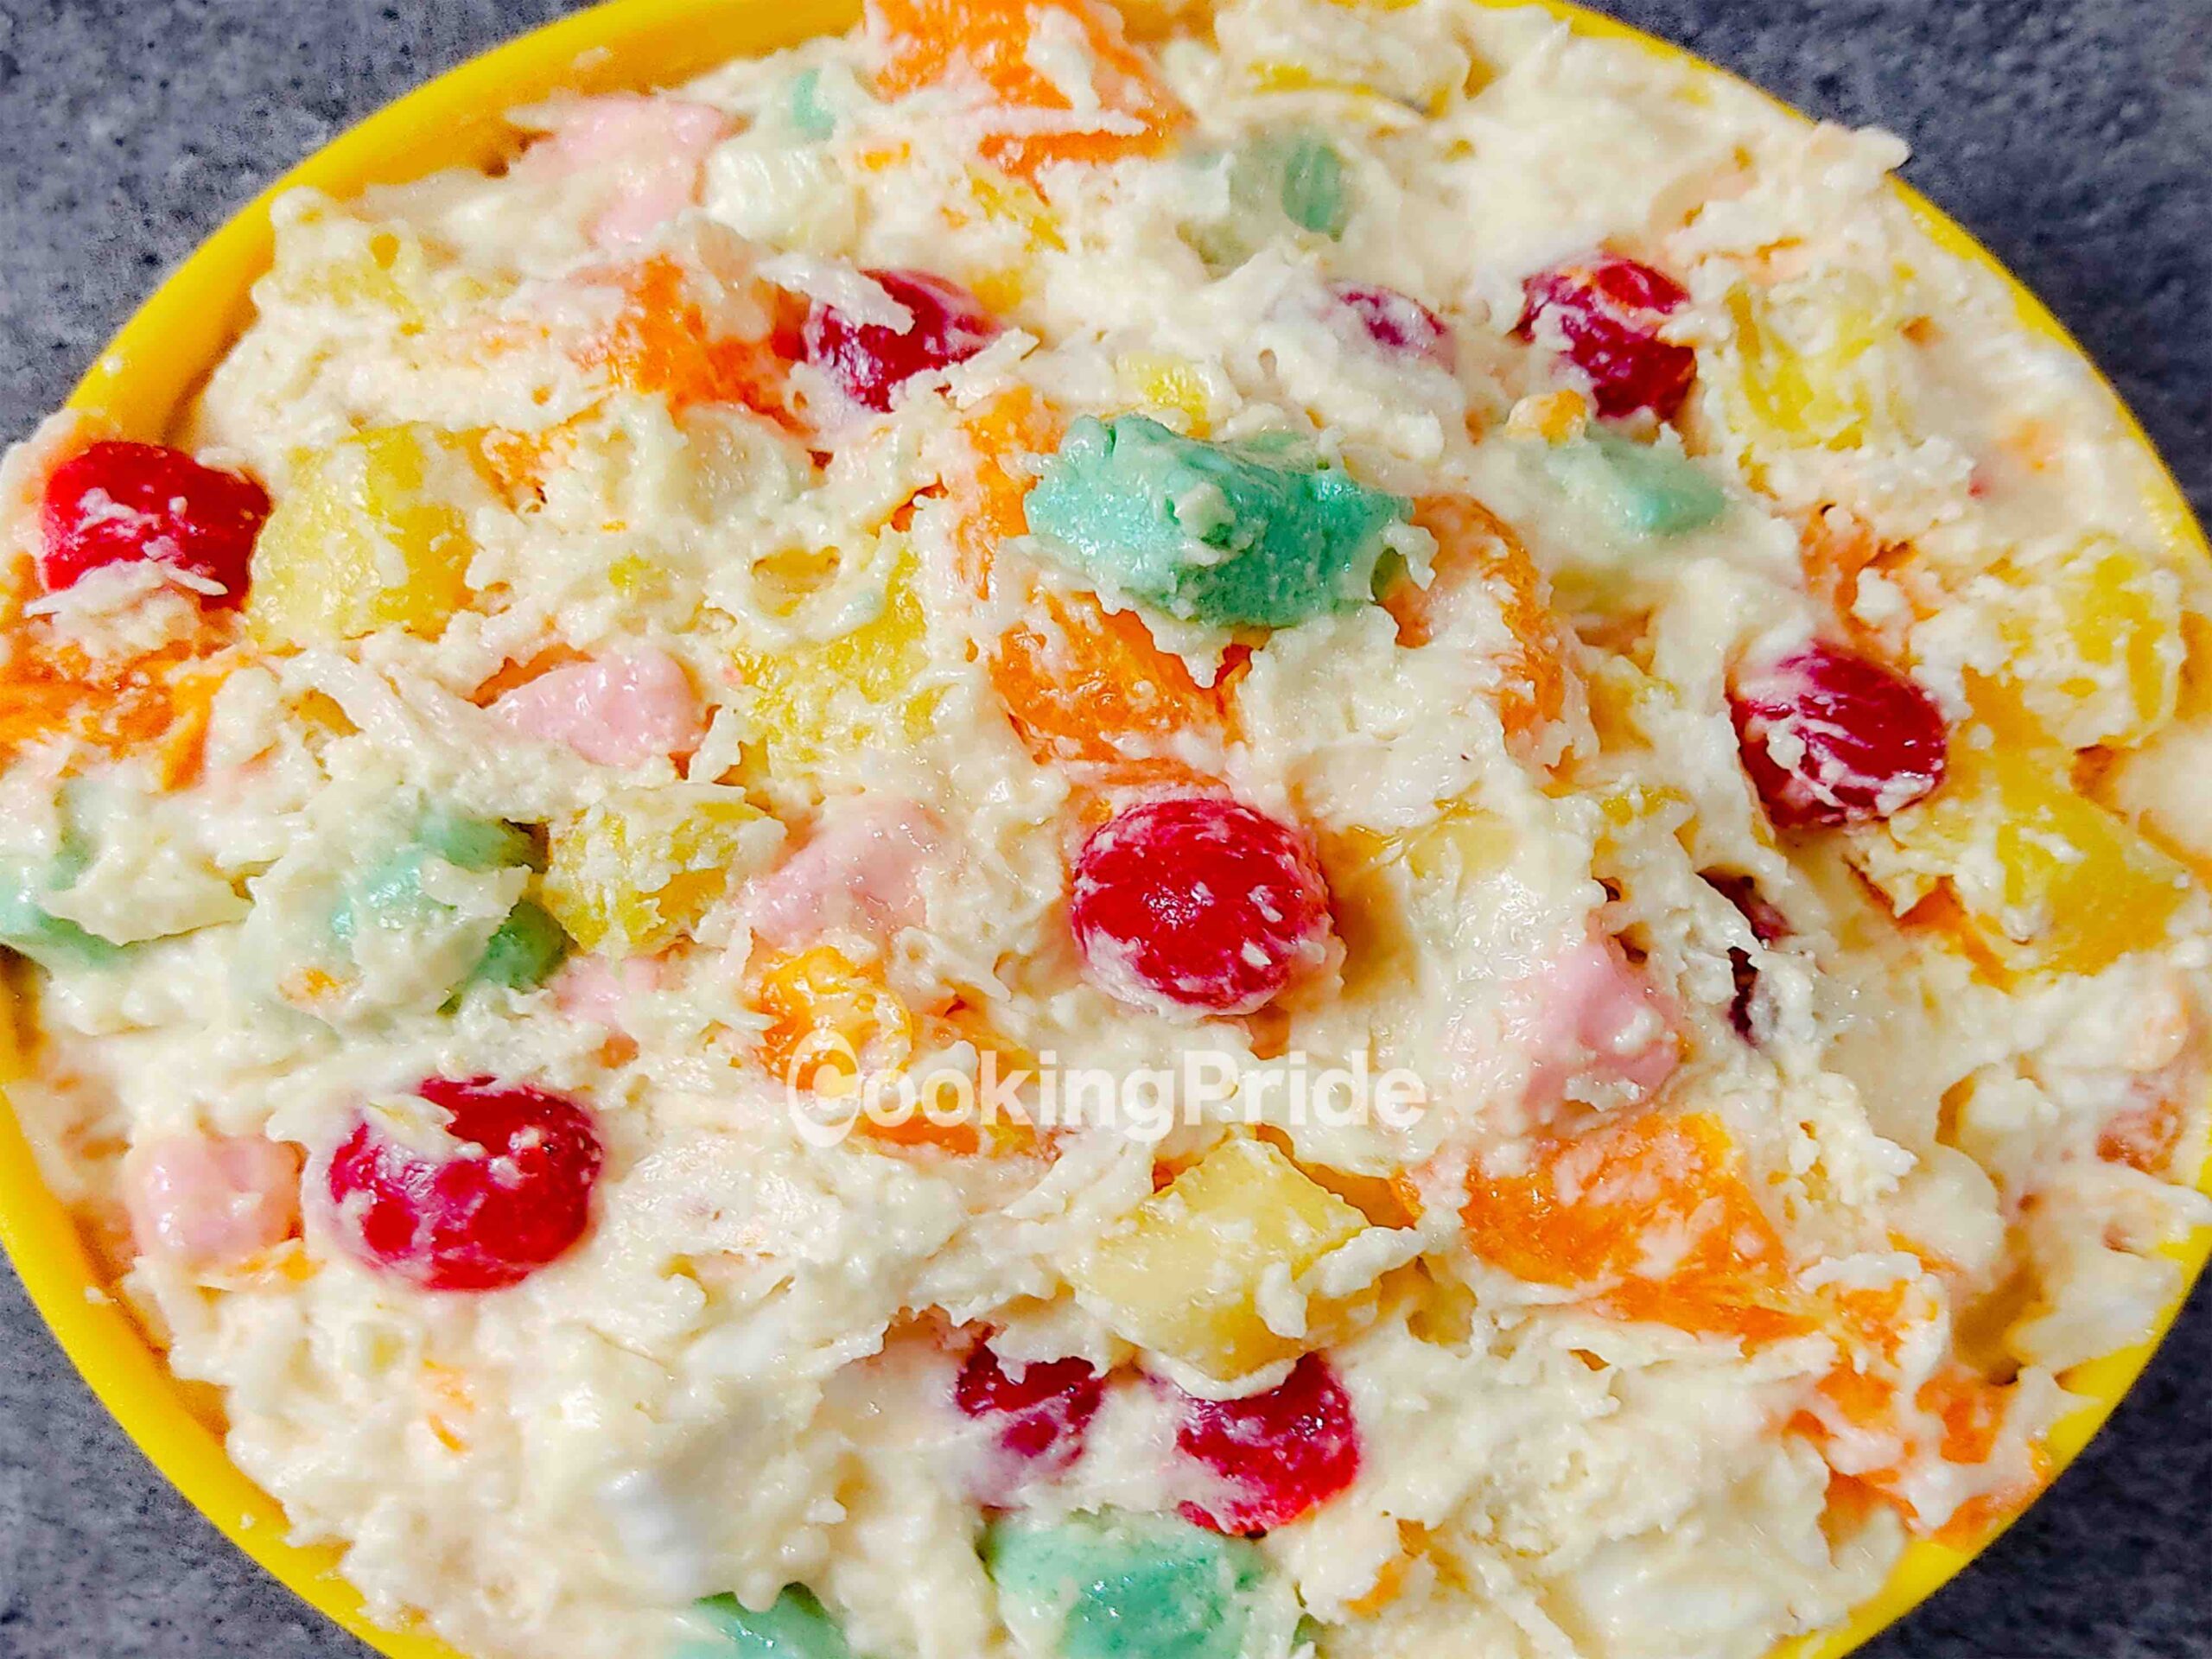 Ambrosia Marshmallow Fruit salad recipe with whipped cream and sour cream by cookingpride